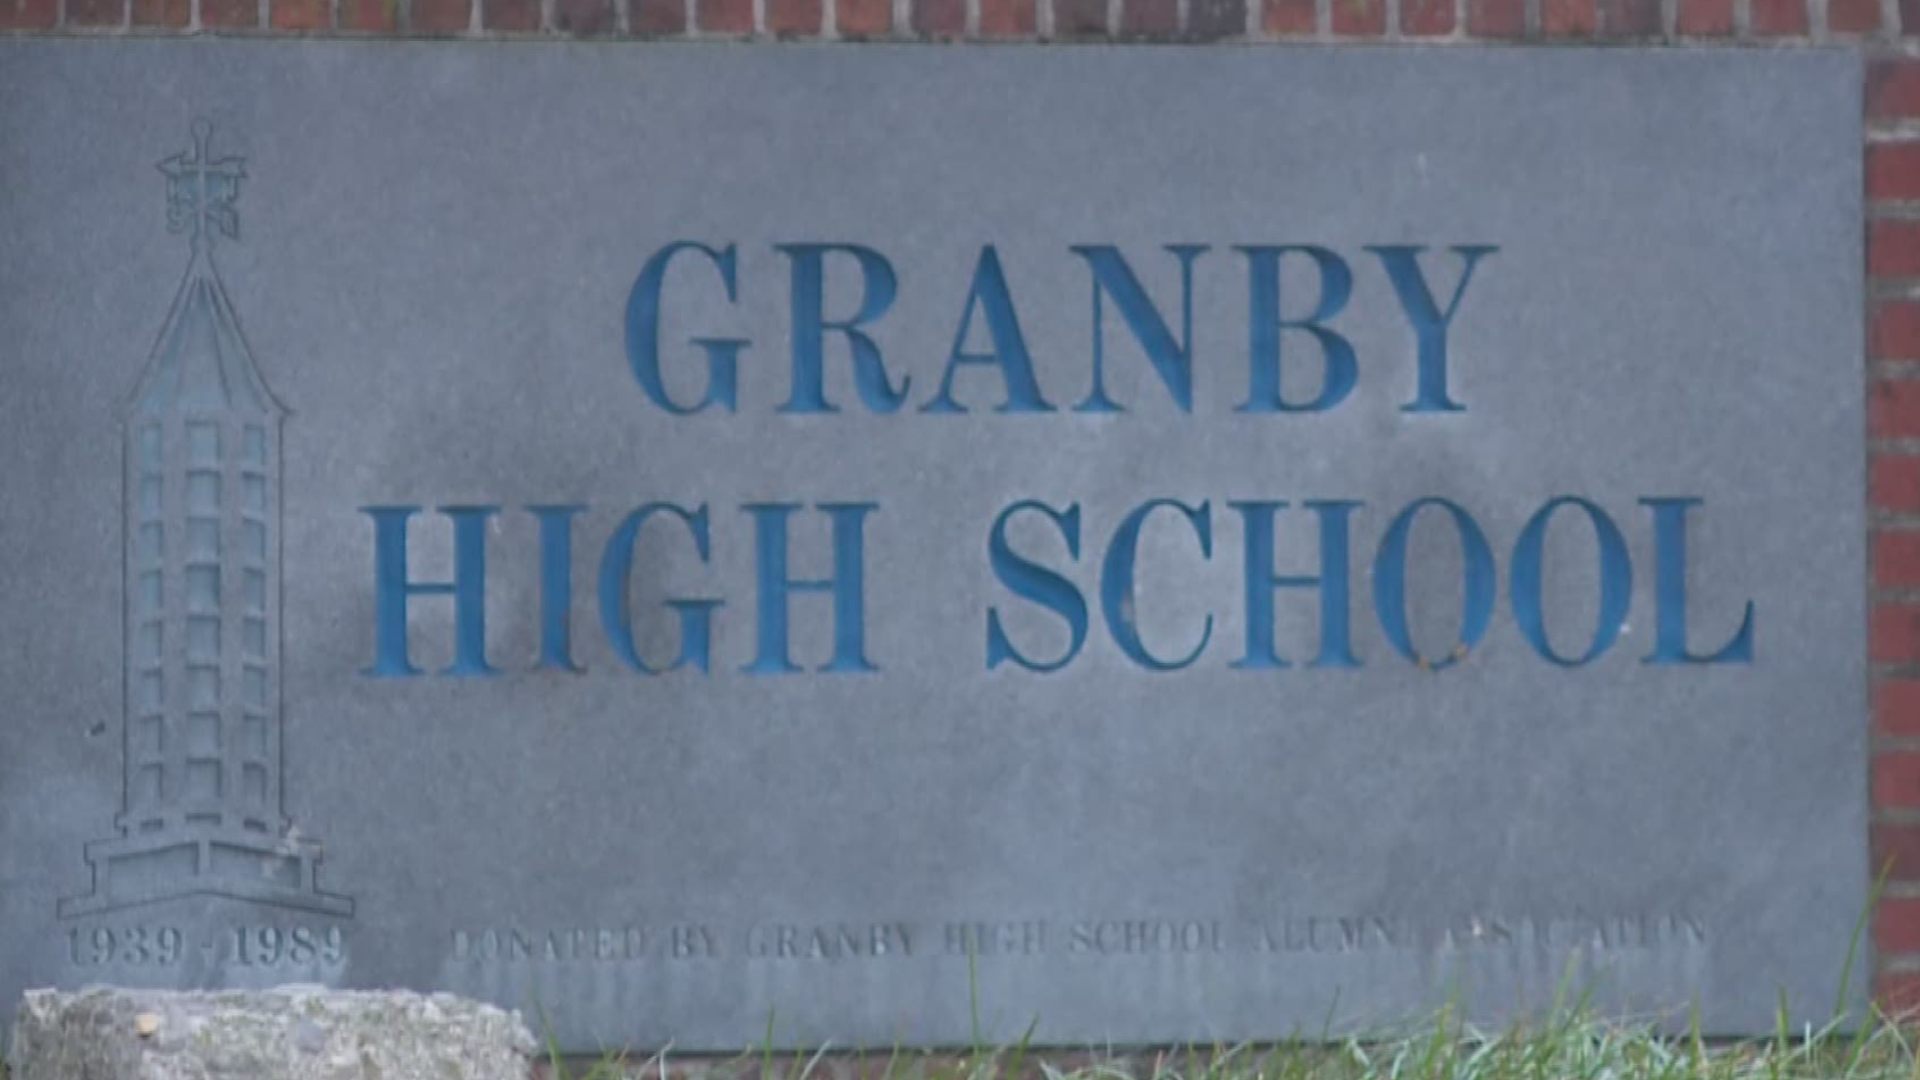 A threat was made toward Granby High School, so Norfolk Public School security team and the Norfolk Police Department will have an increased presence on campus.